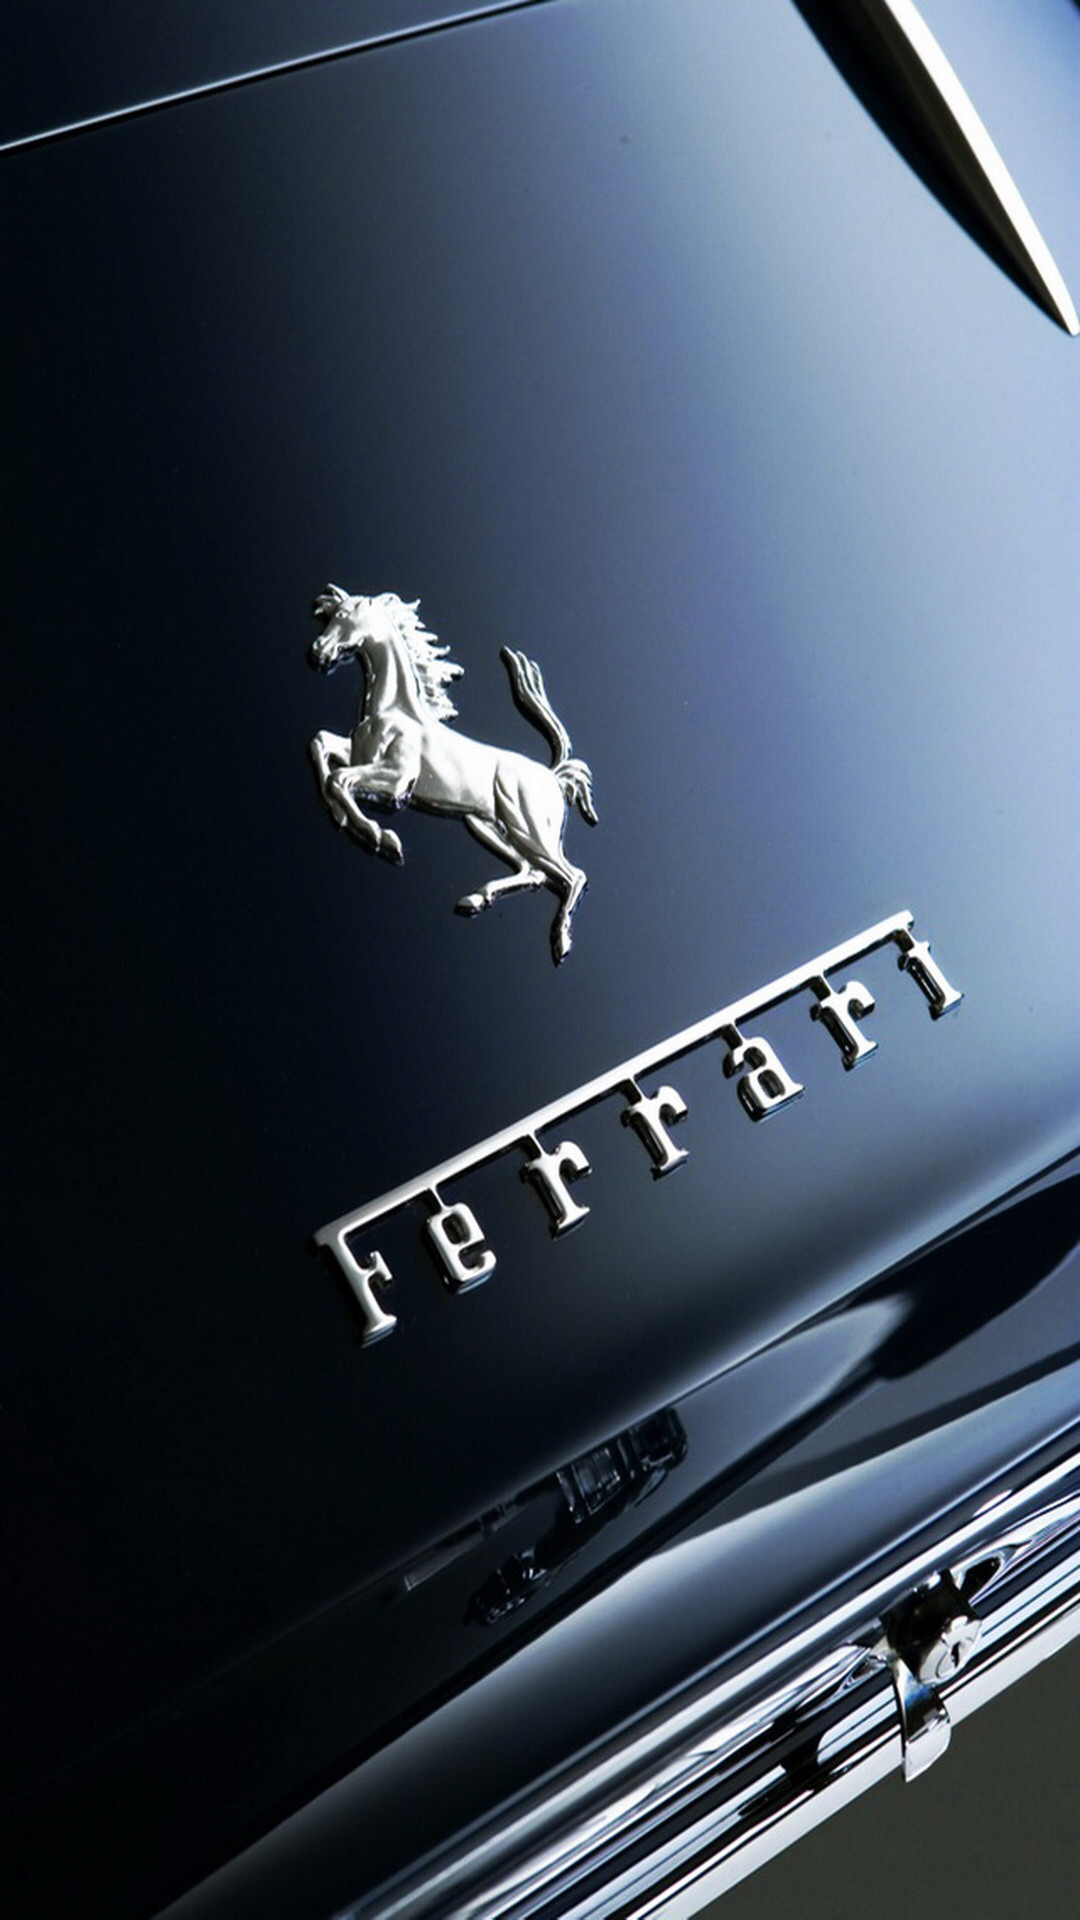 Check Out This Wallpaper For Your Iphone - Black Ferrari Car Symbol - HD Wallpaper 